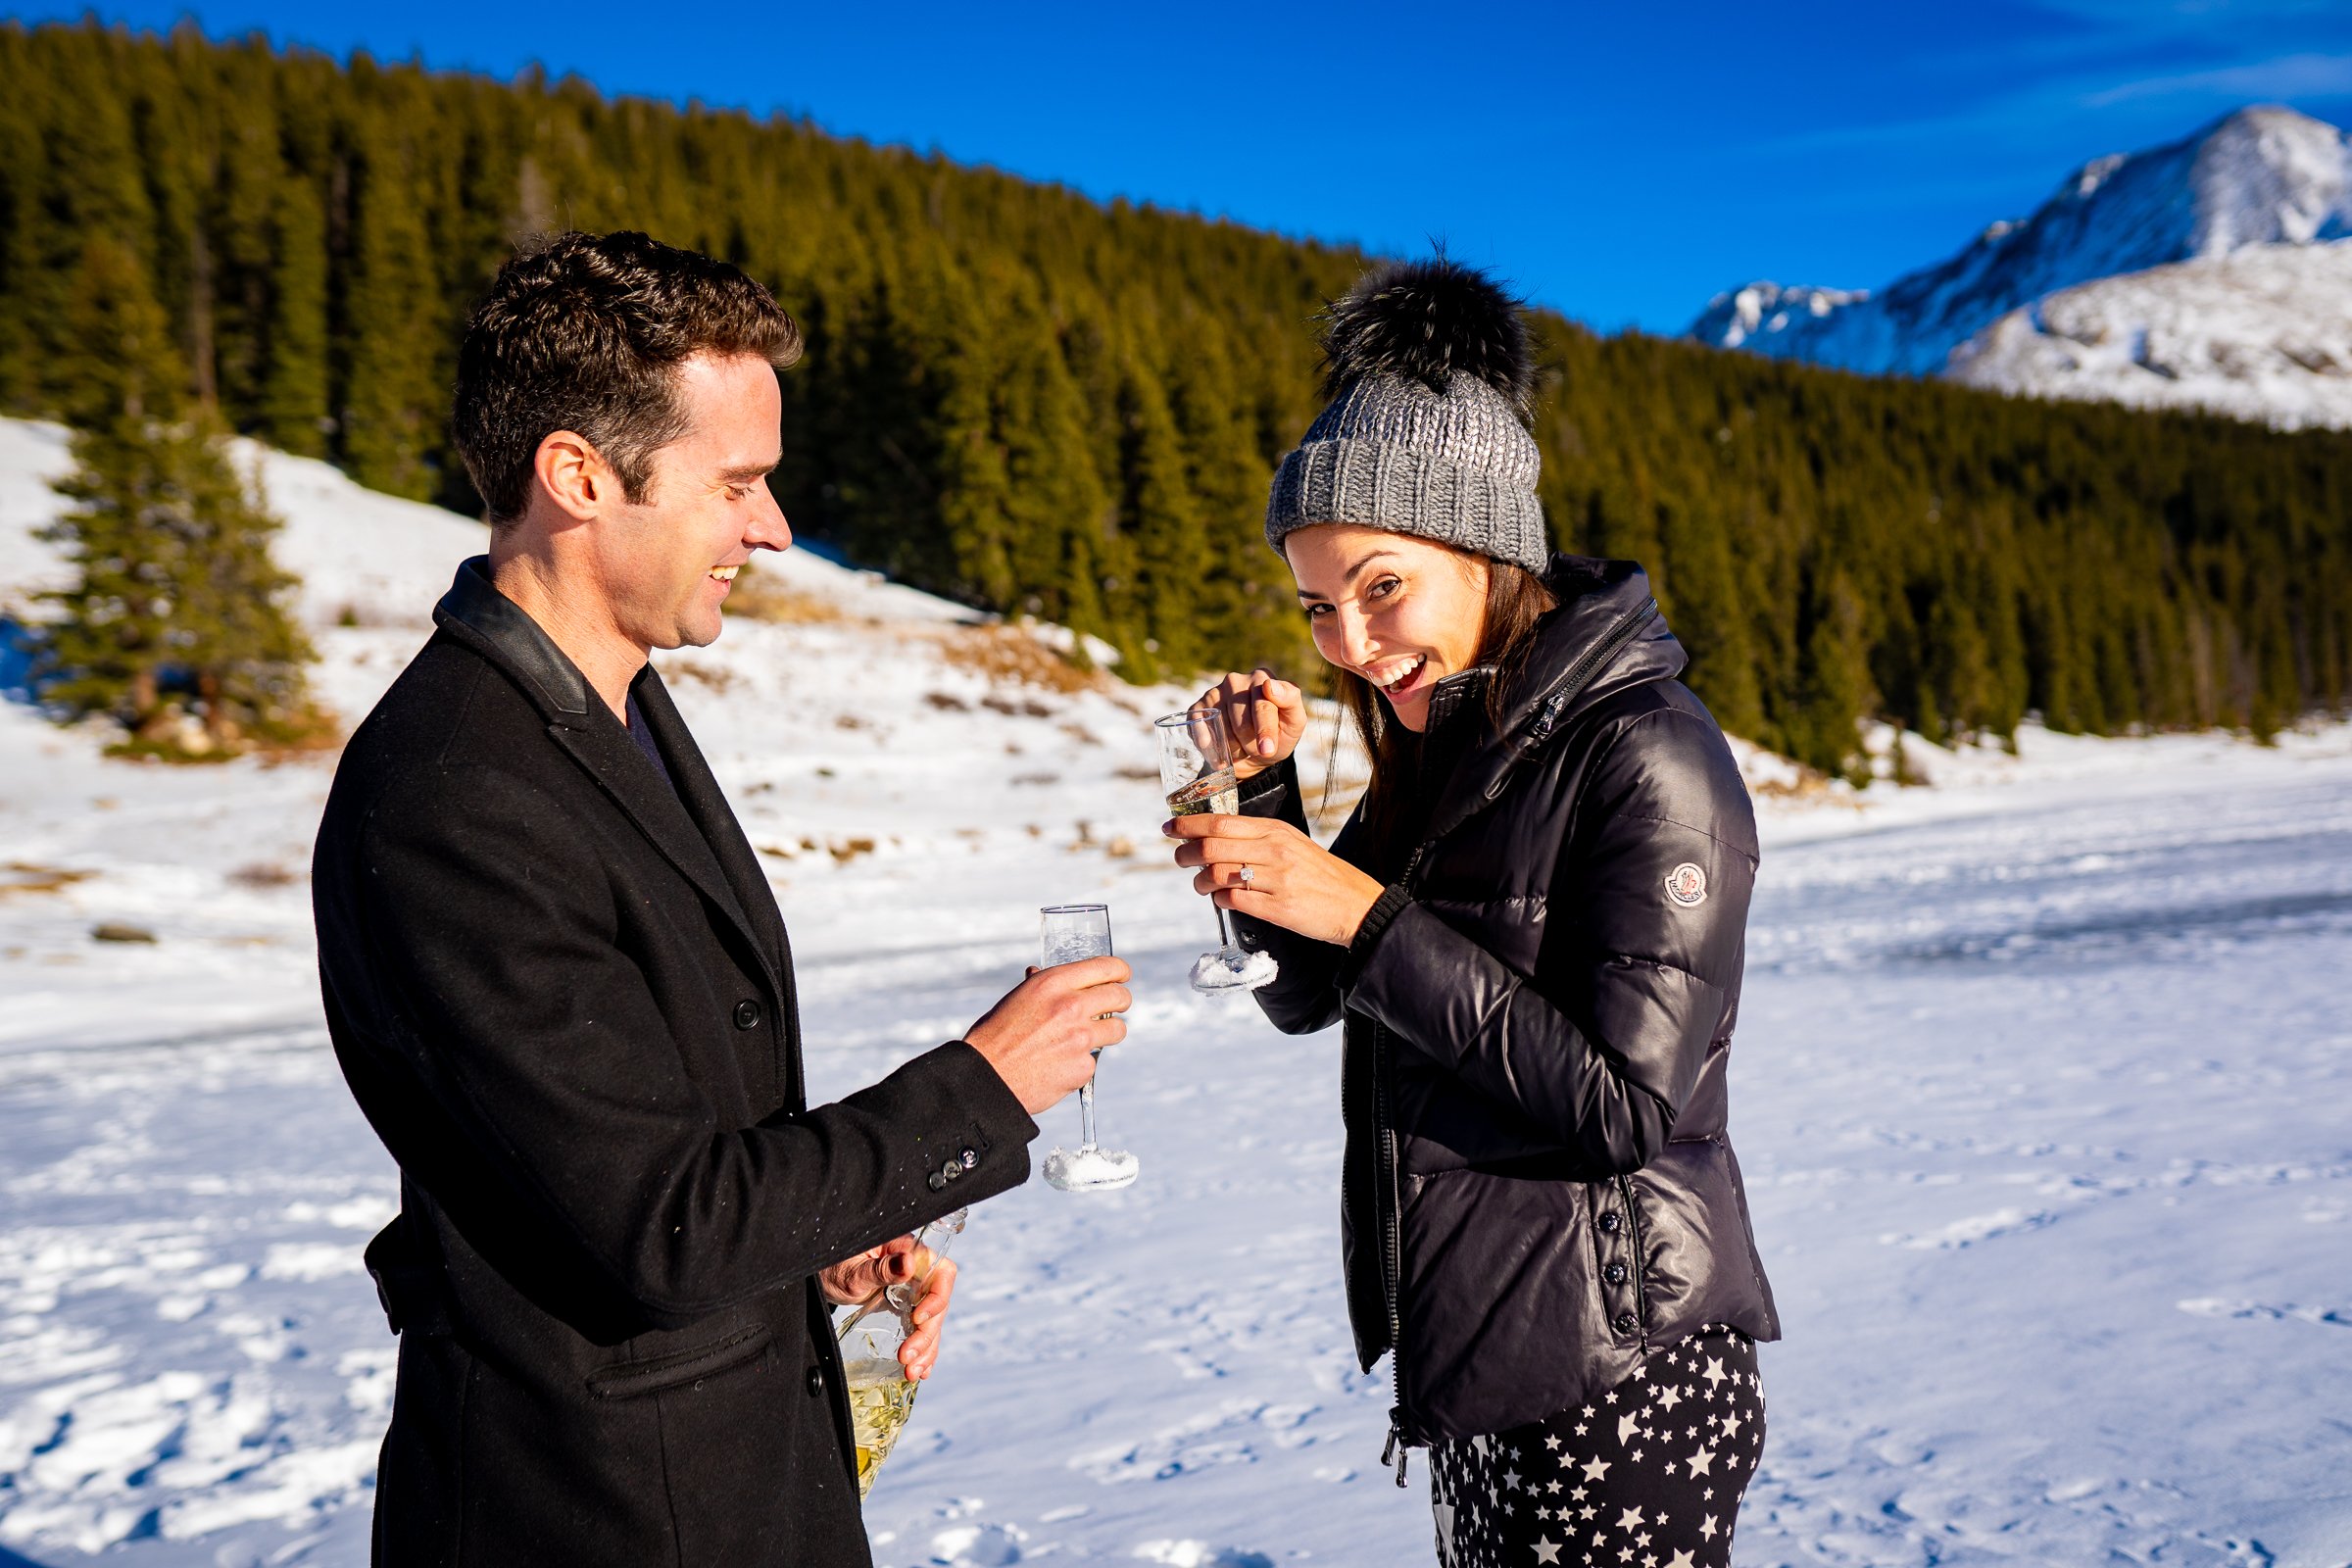 Engaged couple celebrates proposal with champagne on frozen lake with snowcapped mountains in the background, Engagement Session, Engagement Photos, Engagement Photos Inspiration, Engagement Photography, Engagement Photographer, Winter Engagement Photos, Proposal Photos, Proposal Photographer, Proposal Photography, Winter Proposal, Mountain Proposal, Proposal Inspiration, Summit County engagement session, Summit County engagement photos, Summit County engagement photography, Summit County engagement photographer, Summit County engagement inspiration, Colorado engagement session, Colorado engagement photos, Colorado engagement photography, Colorado engagement photographer, Colorado engagement inspiration, Clinton Gulch Engagement